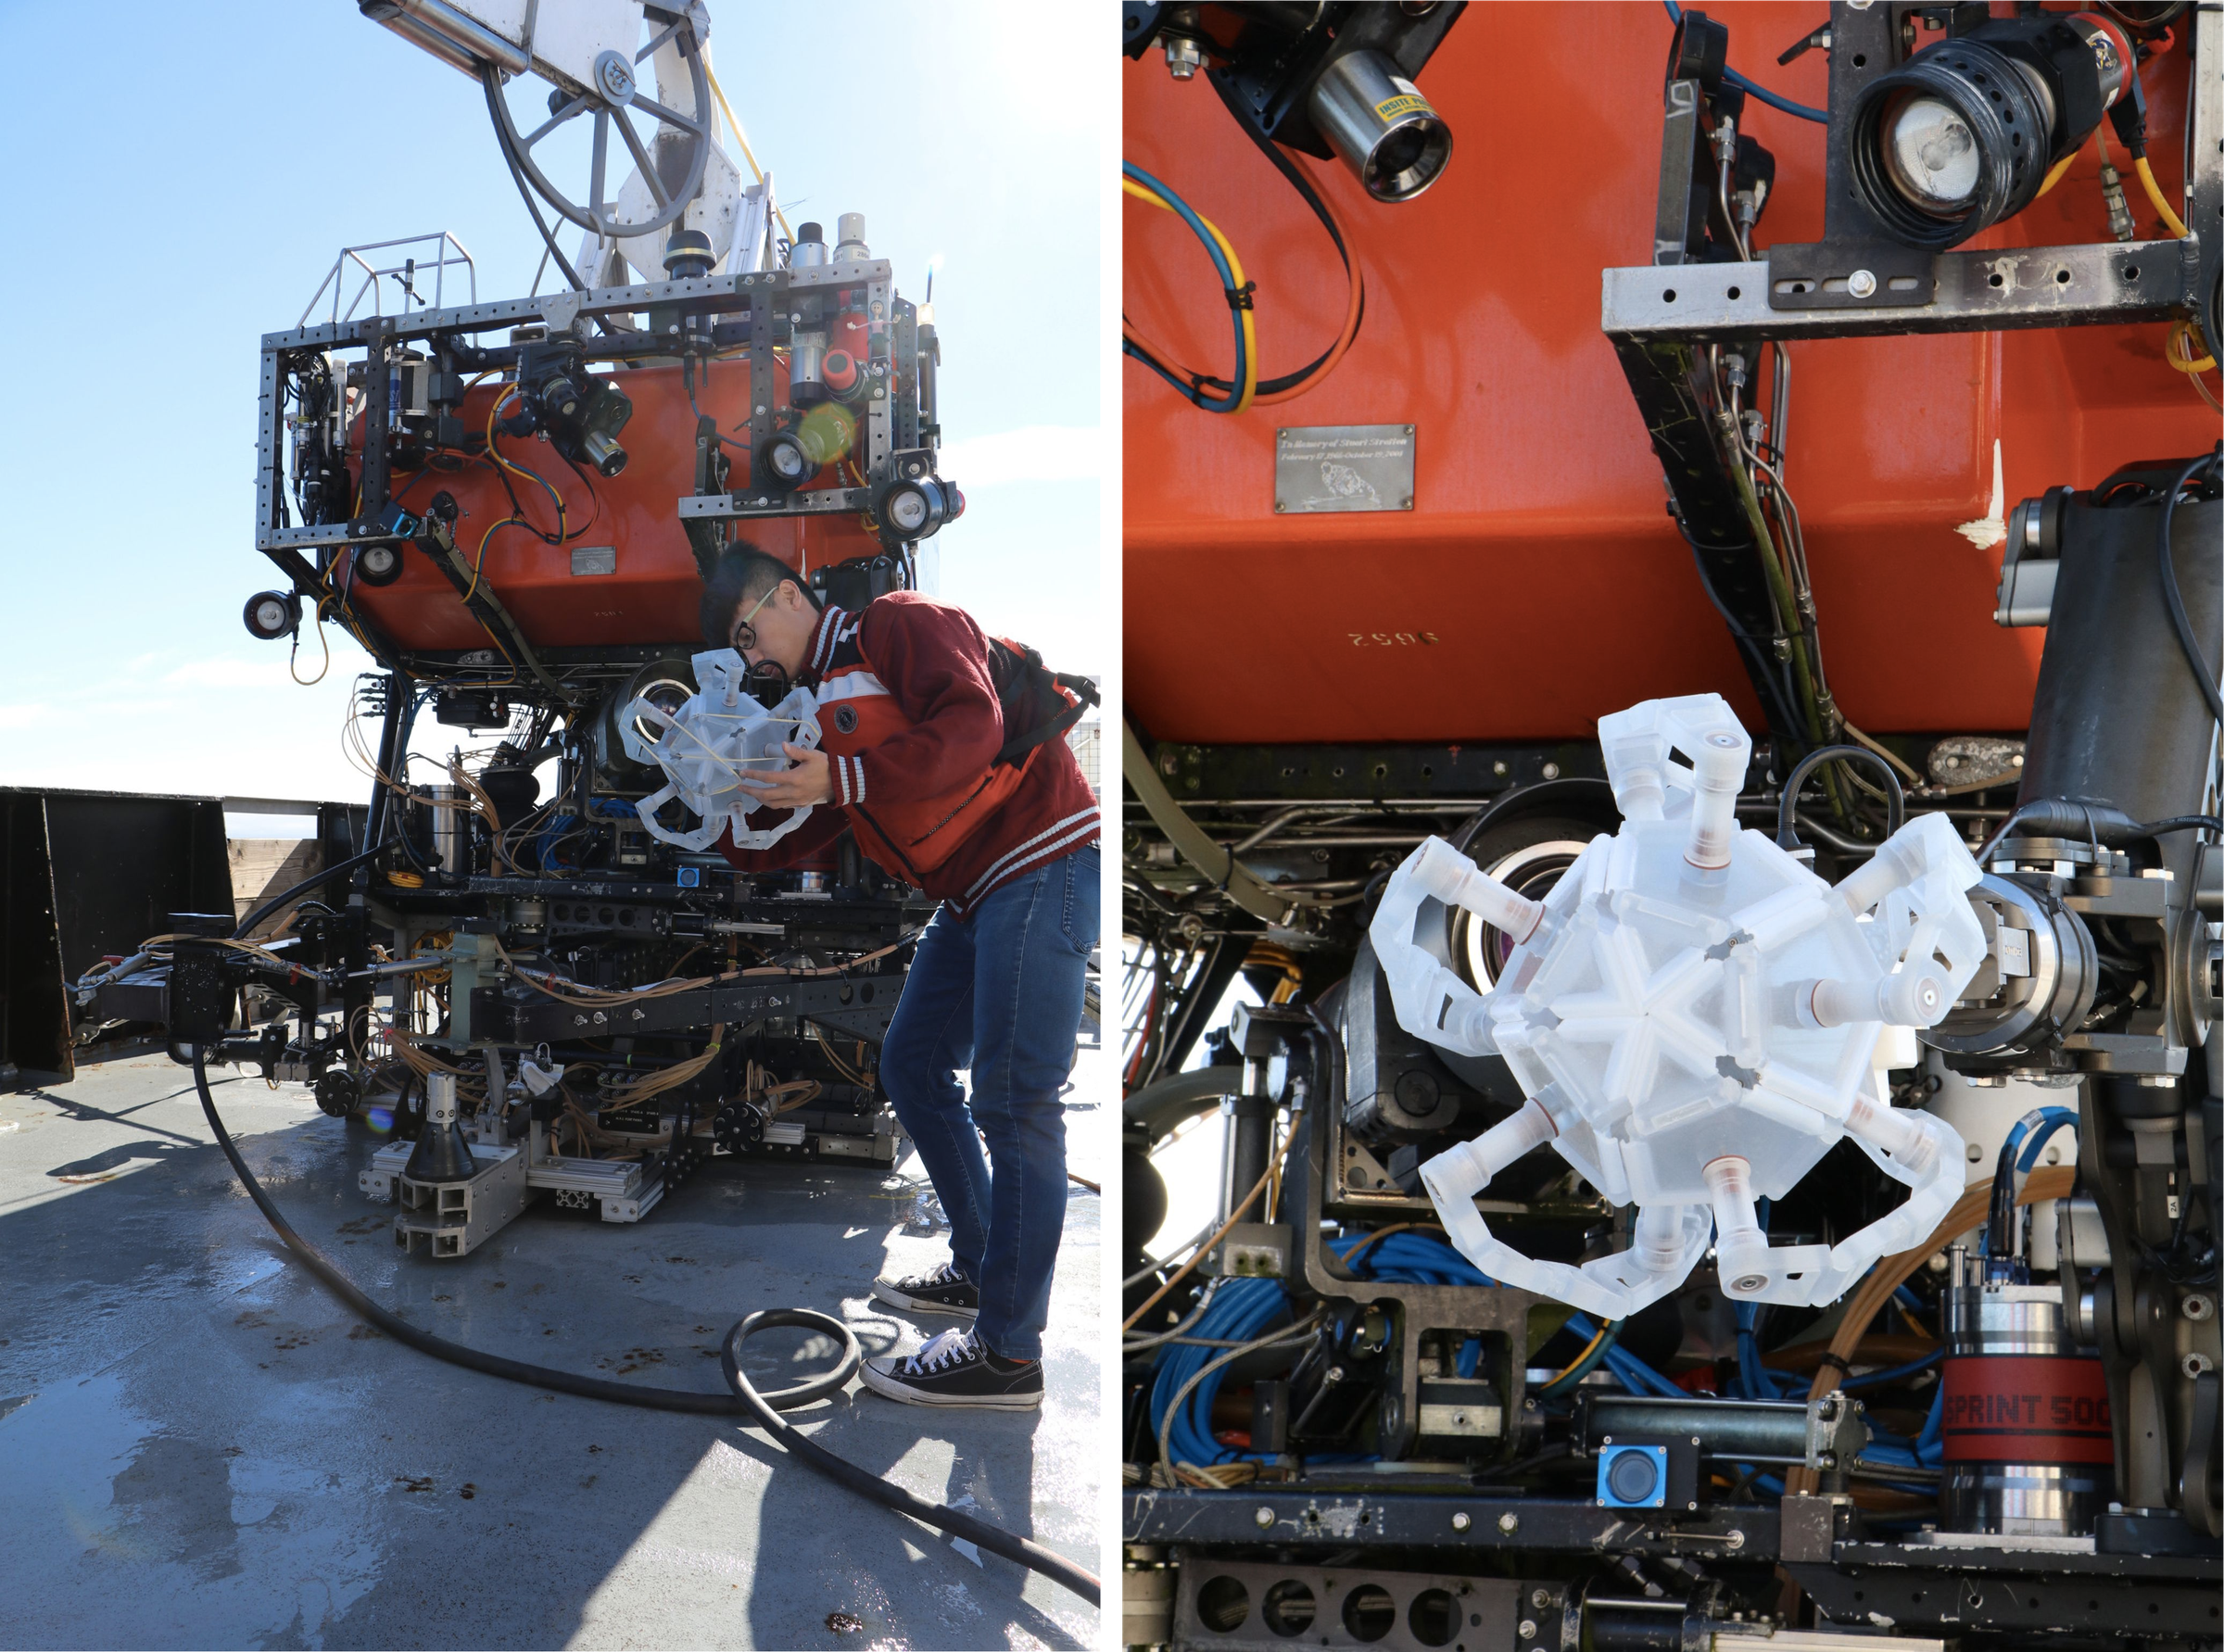 Lead author of the research, Zhi Ern Teoh, inspects the RAD when attached to an underwater rover (left) and a close-up of the RAD, folded shut (right).